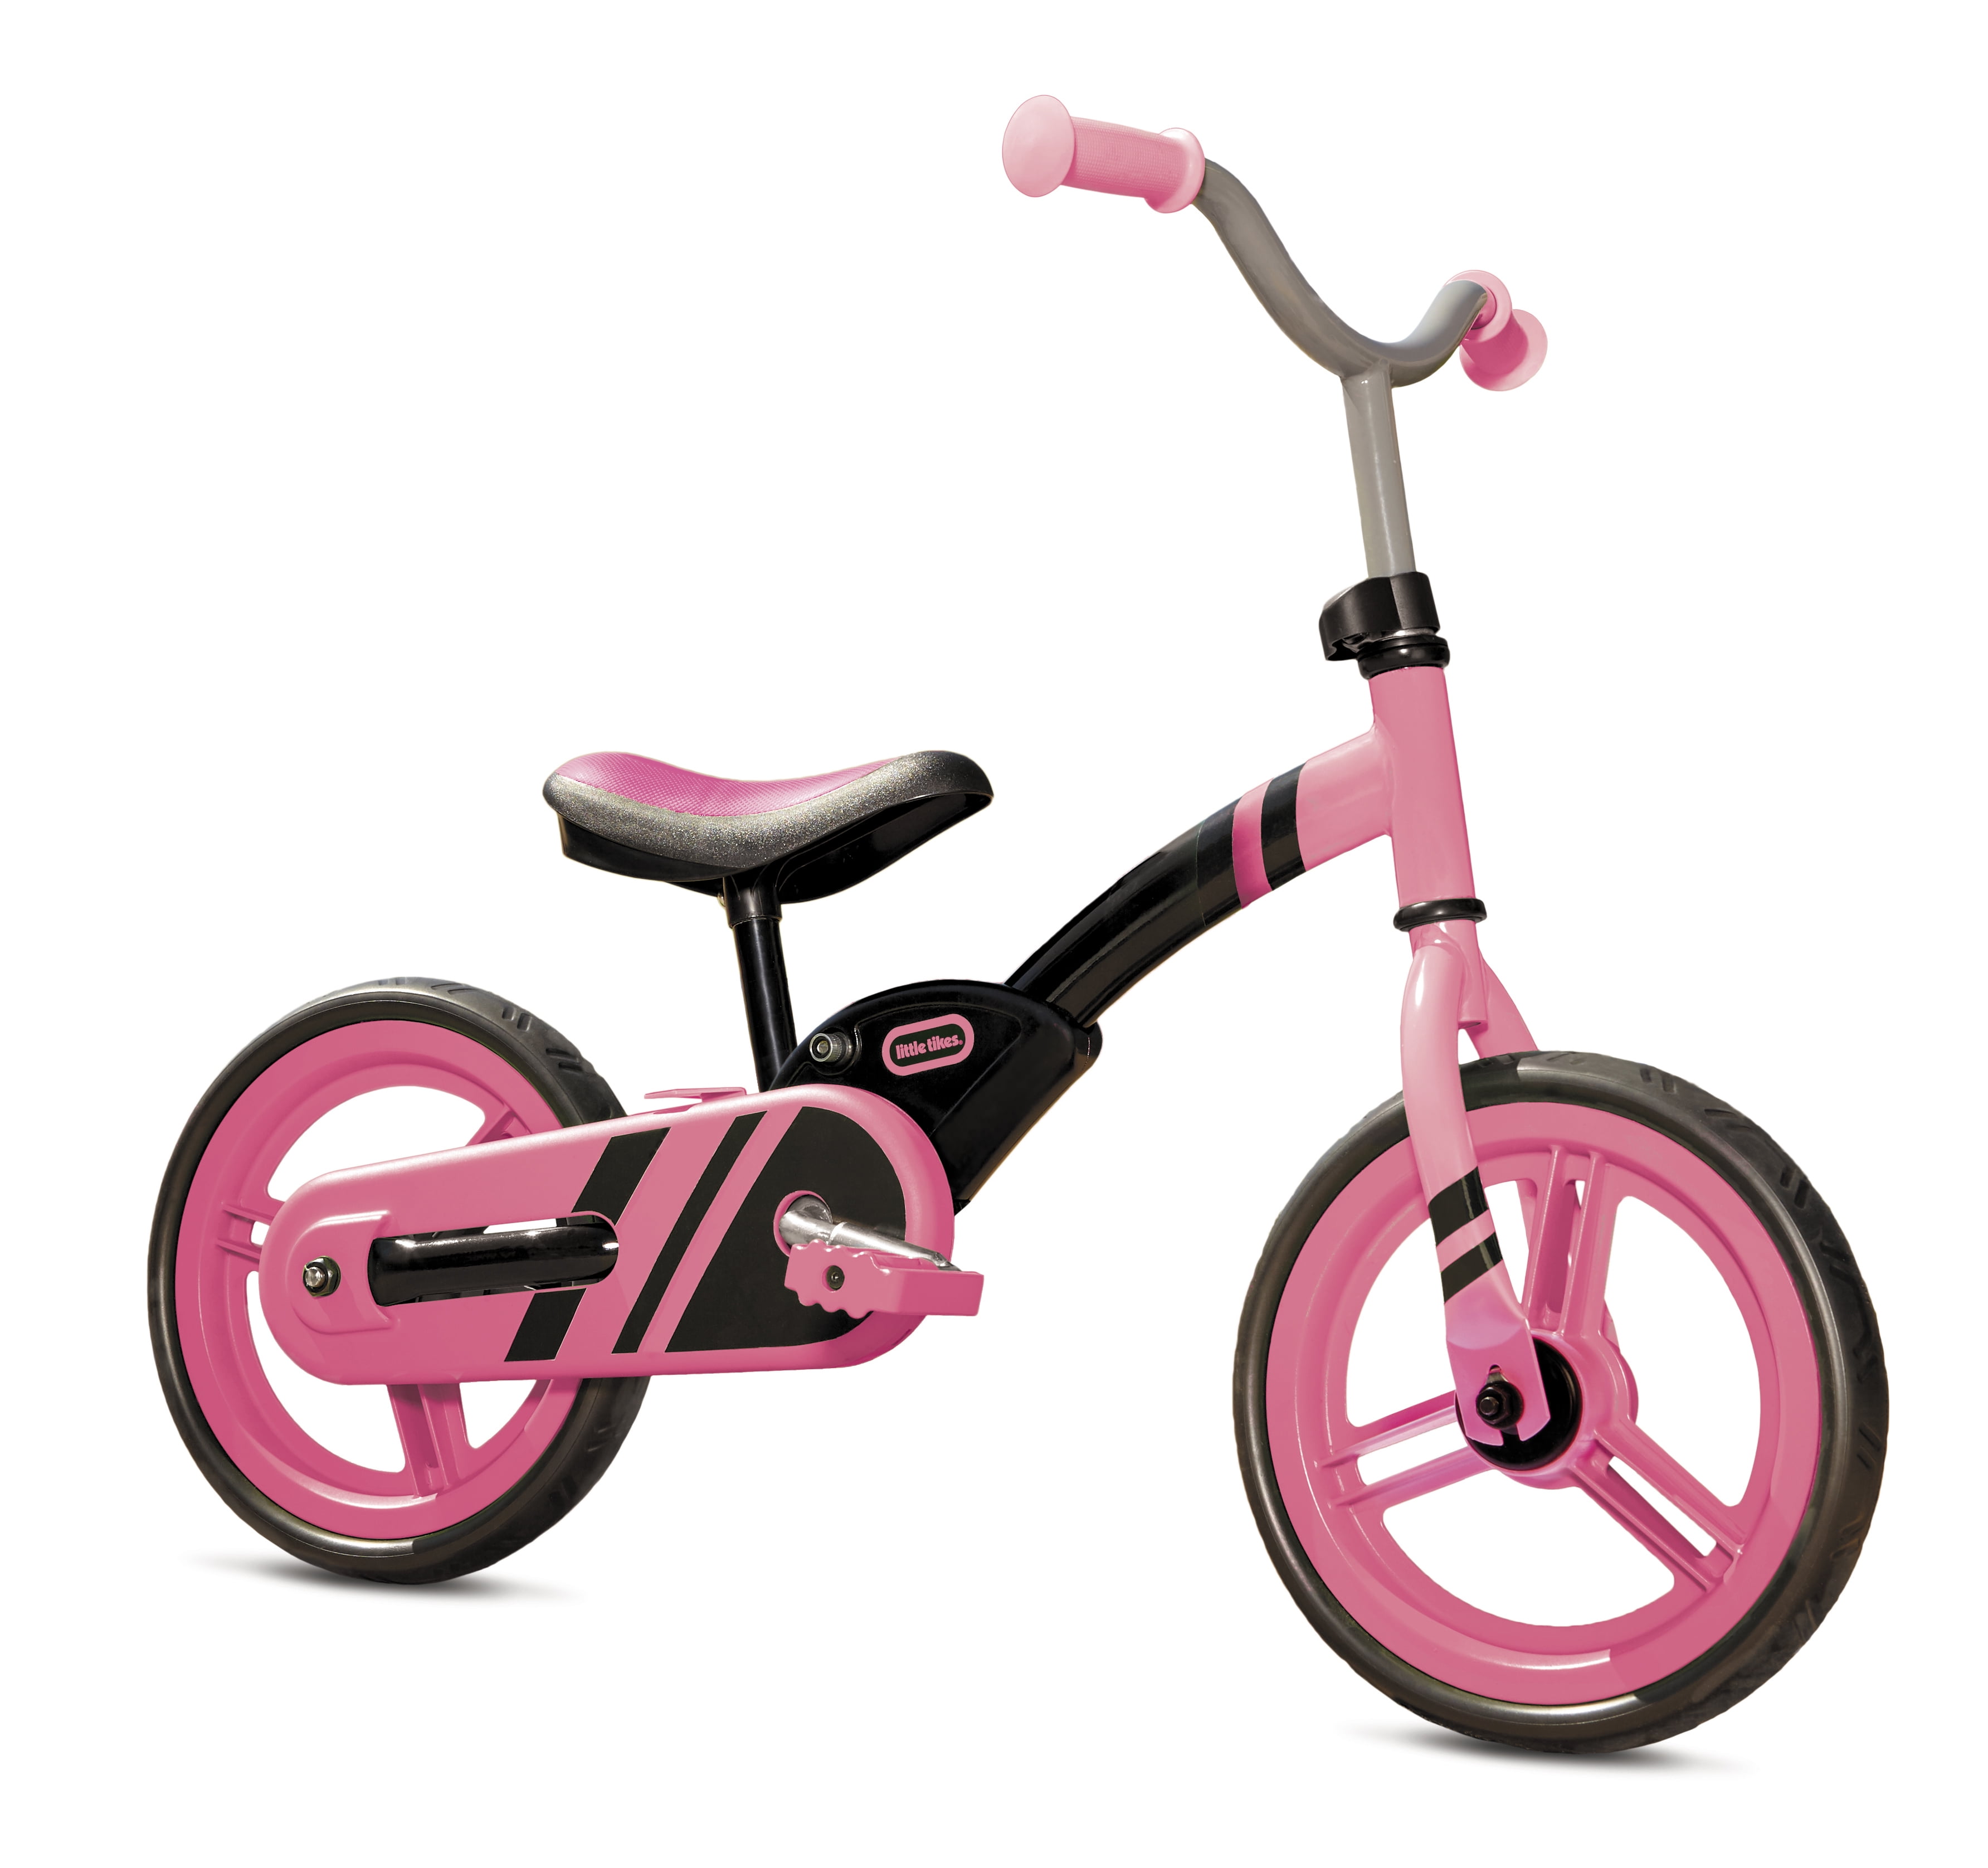 Bikestar bike without pedals for children 2-3 years12 inch classic